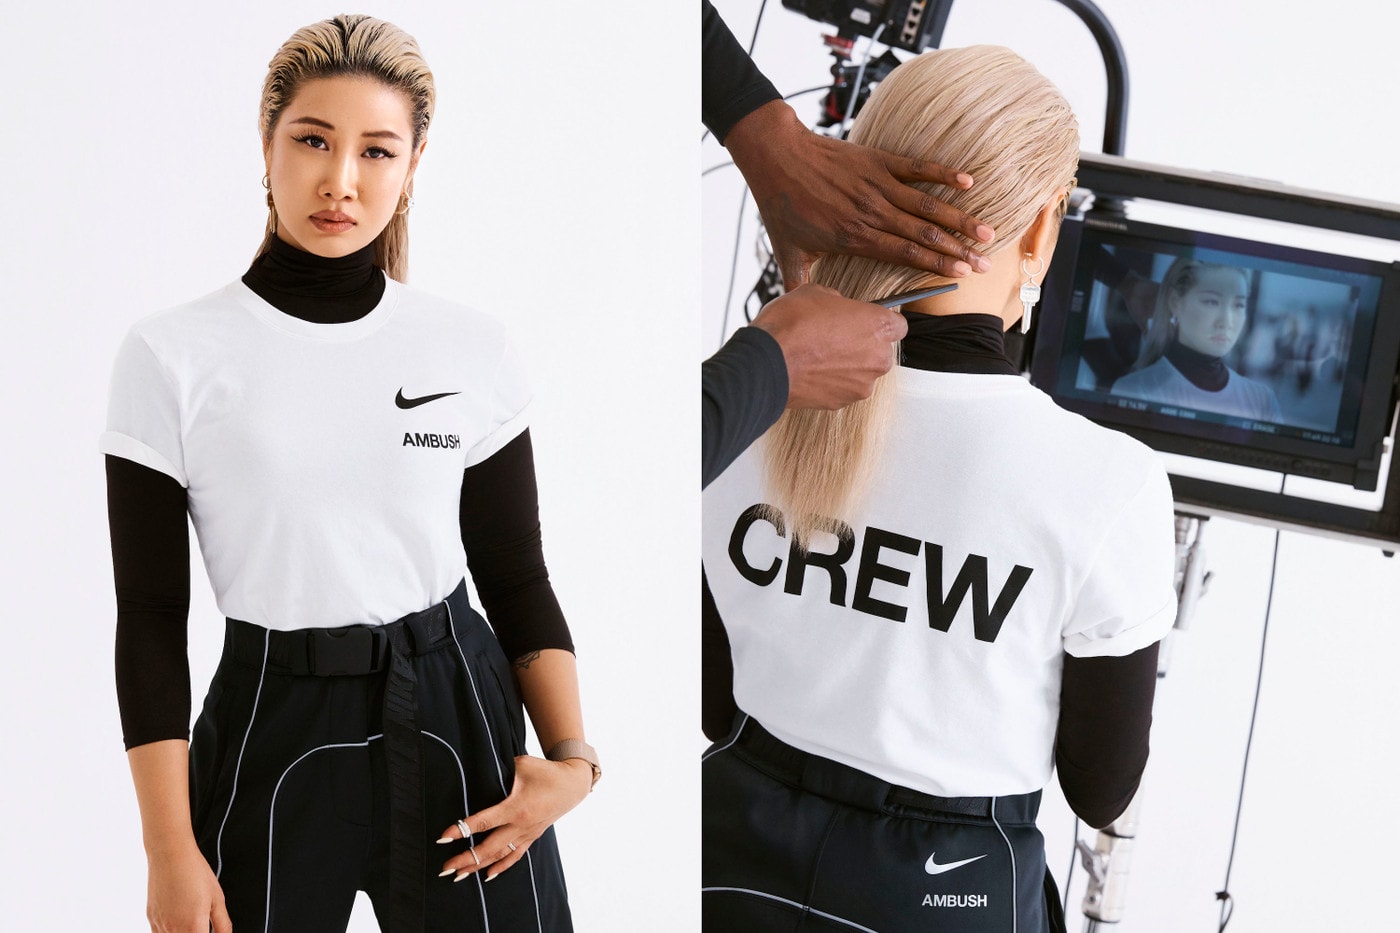 AMBUSH x Nike Collaboration Official Look Collaborative Collab Clothing Fashion Footwear Collection Lookbook Behind The Scenes BTS 